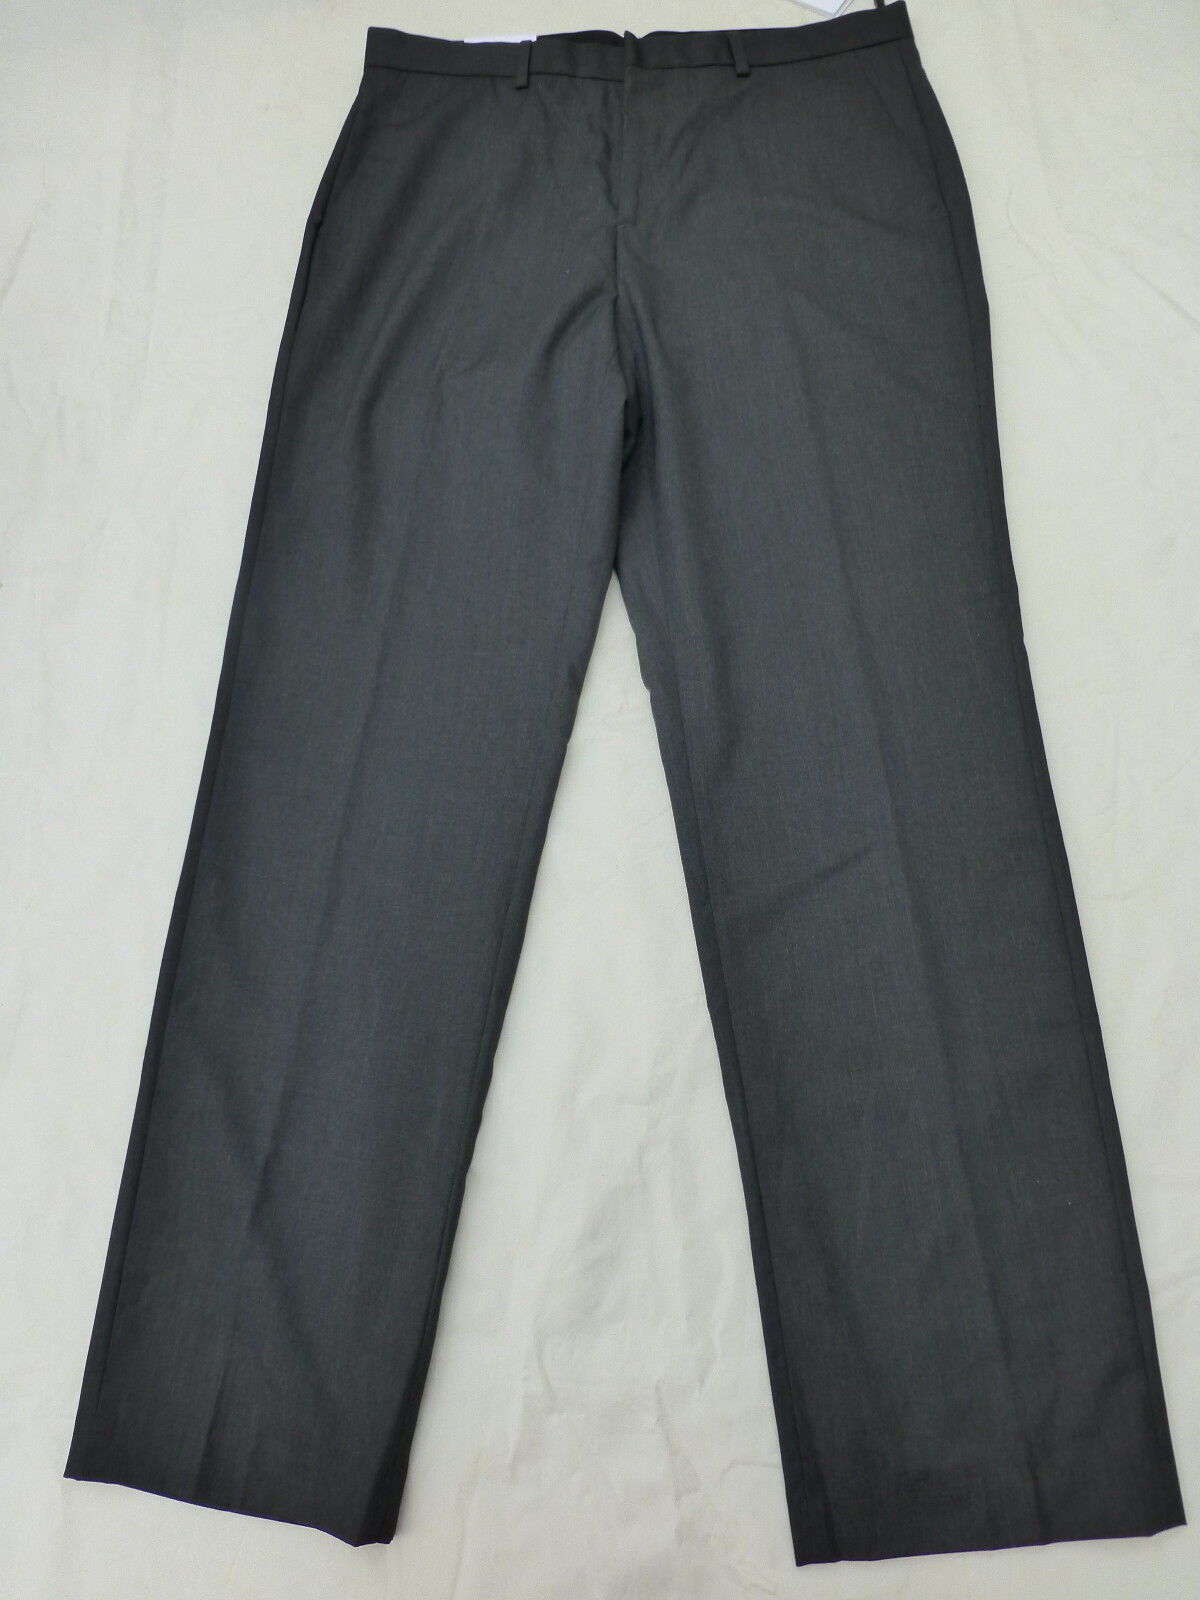 NWT MENS CALVIN KLEIN STRAIGHT FIT FLAT FRONT PANTS $59 DARK CLIFF HTR ...